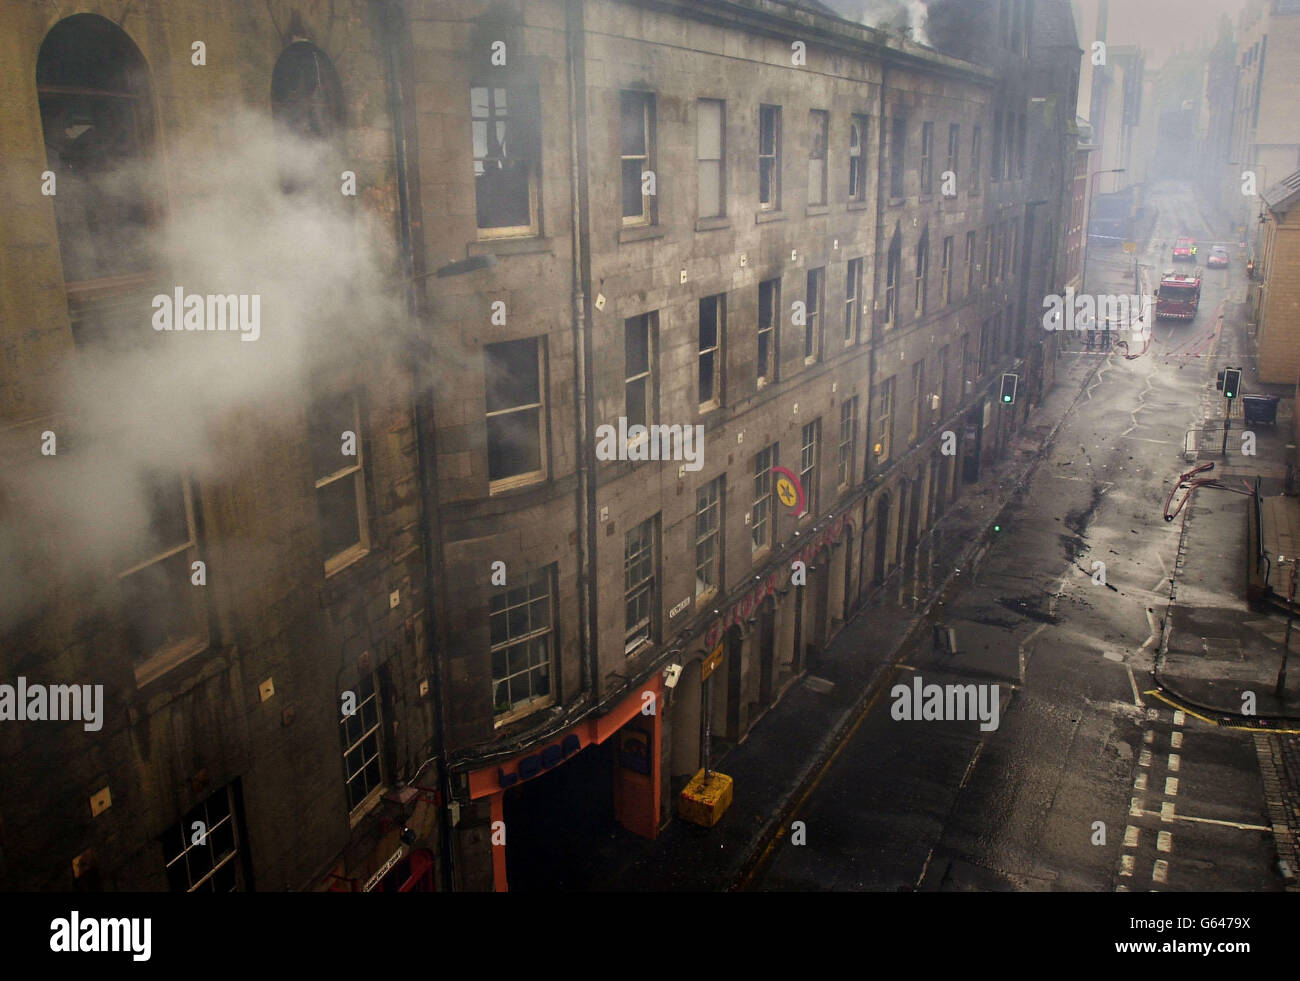 A firefighter trains his hose on buildings in Edinburgh's Cowgate, with Edinburgh University in the background, after a fire which began the night before. Firefighters were still battling to contain the blaze which has devastated part of the city's historic Old Town, *..causing millions of pounds worth of damage, more than 12 hours since it first broke out in a nightclub there. Stock Photo